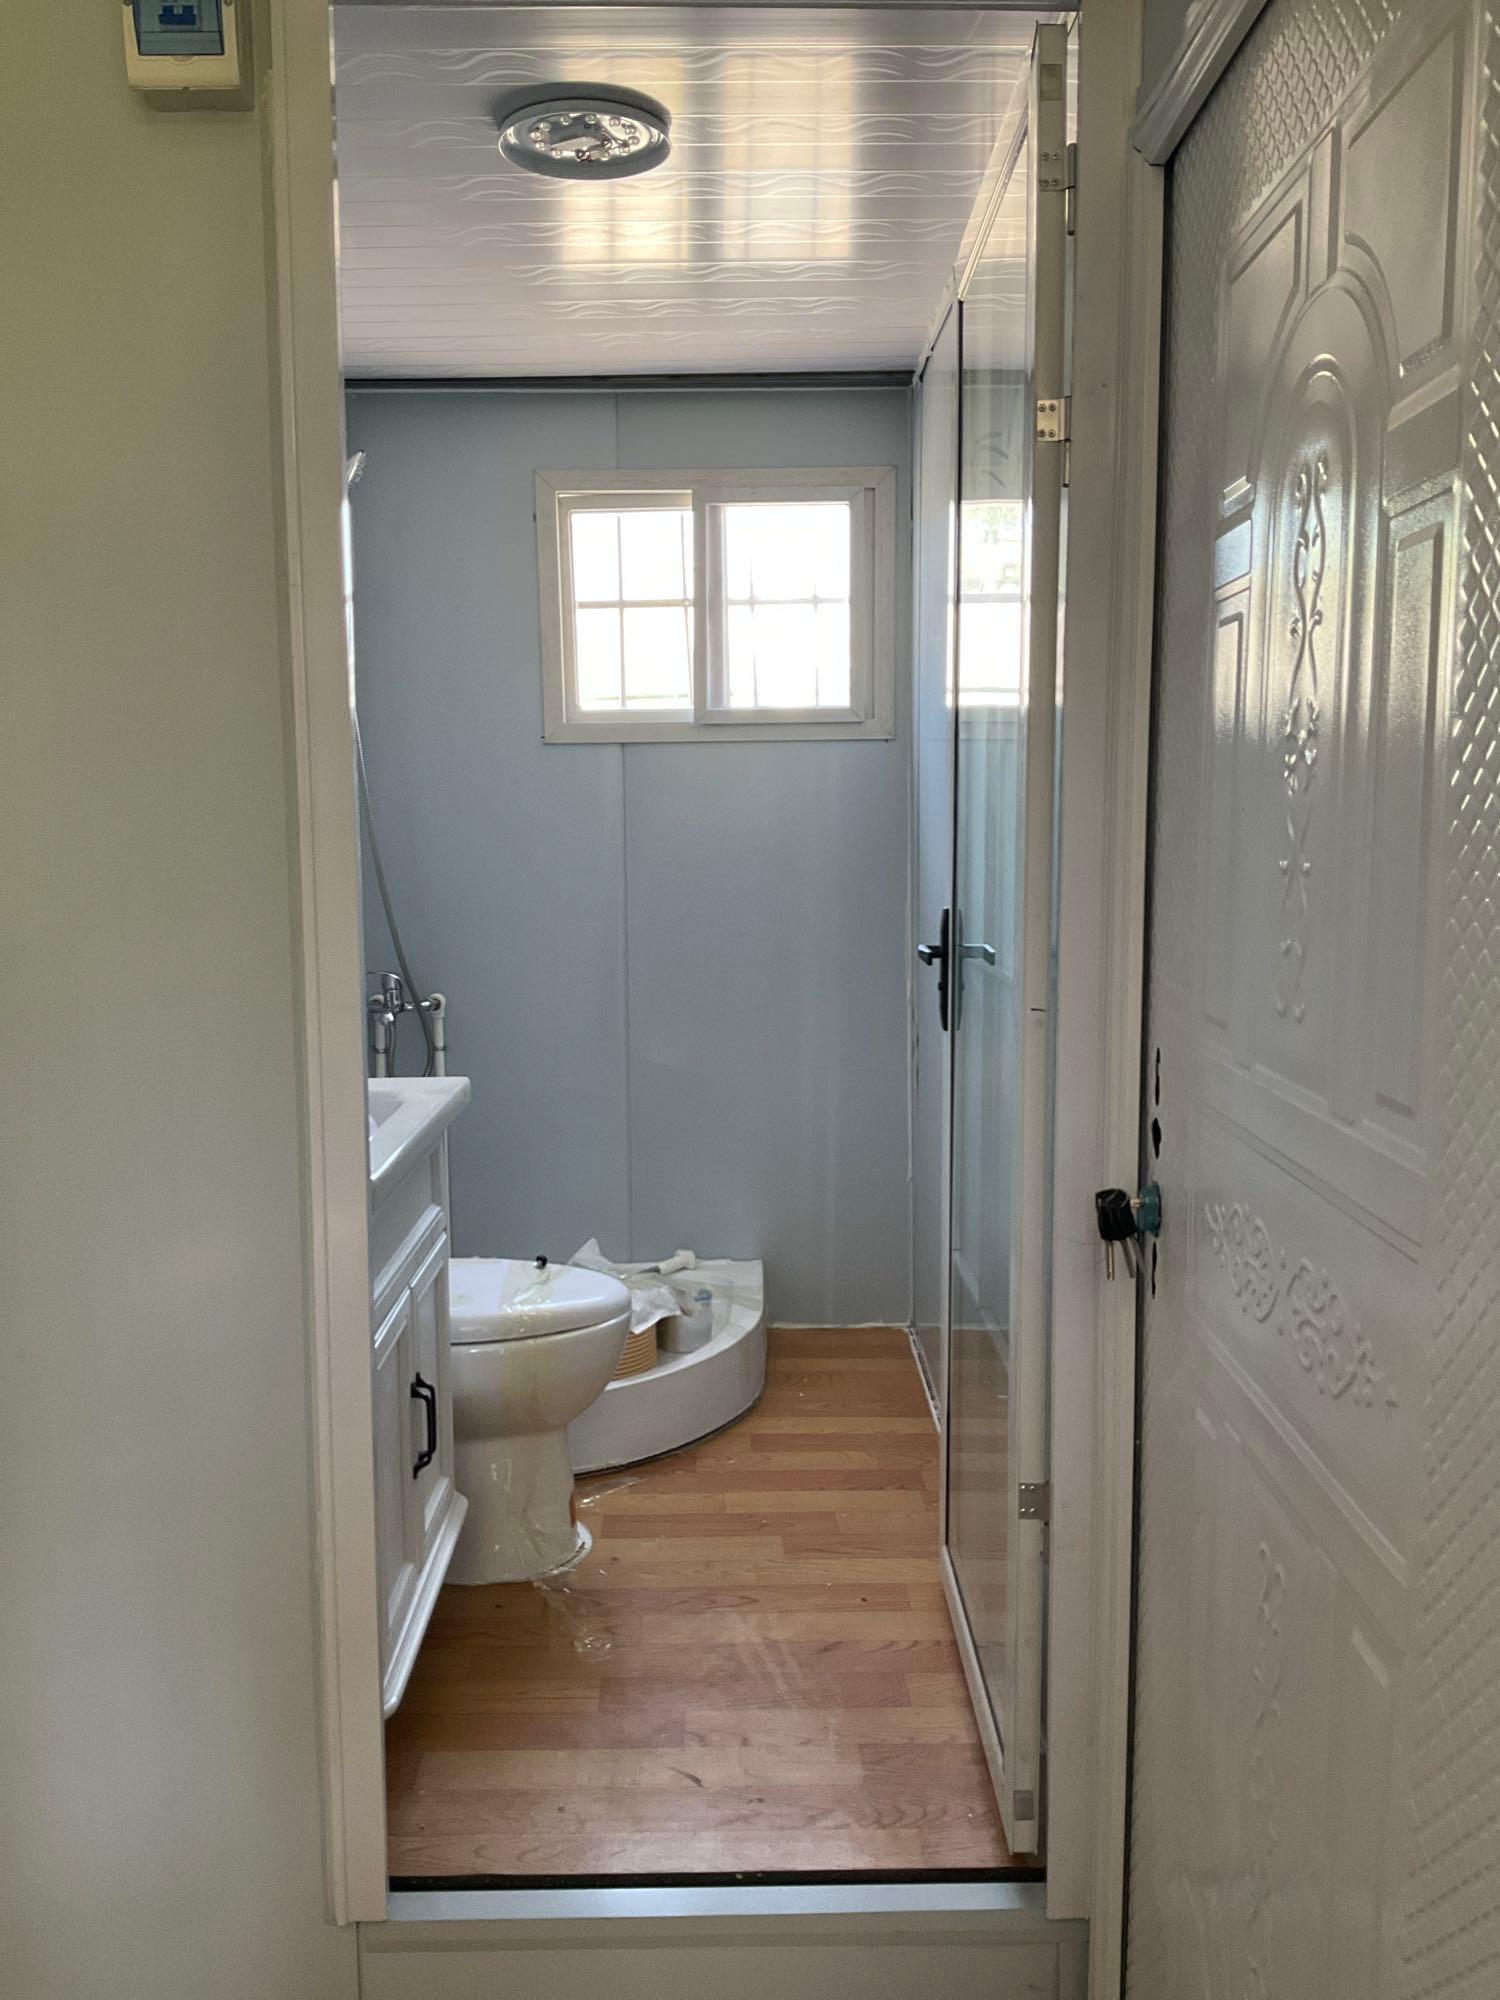 UNUSED EXPANDABLE HOUSE  SHOWER ROOM, TOILET,  PLUMBING AND ELECTRIC HOOK UP, 110V,  LIGHTING , A...